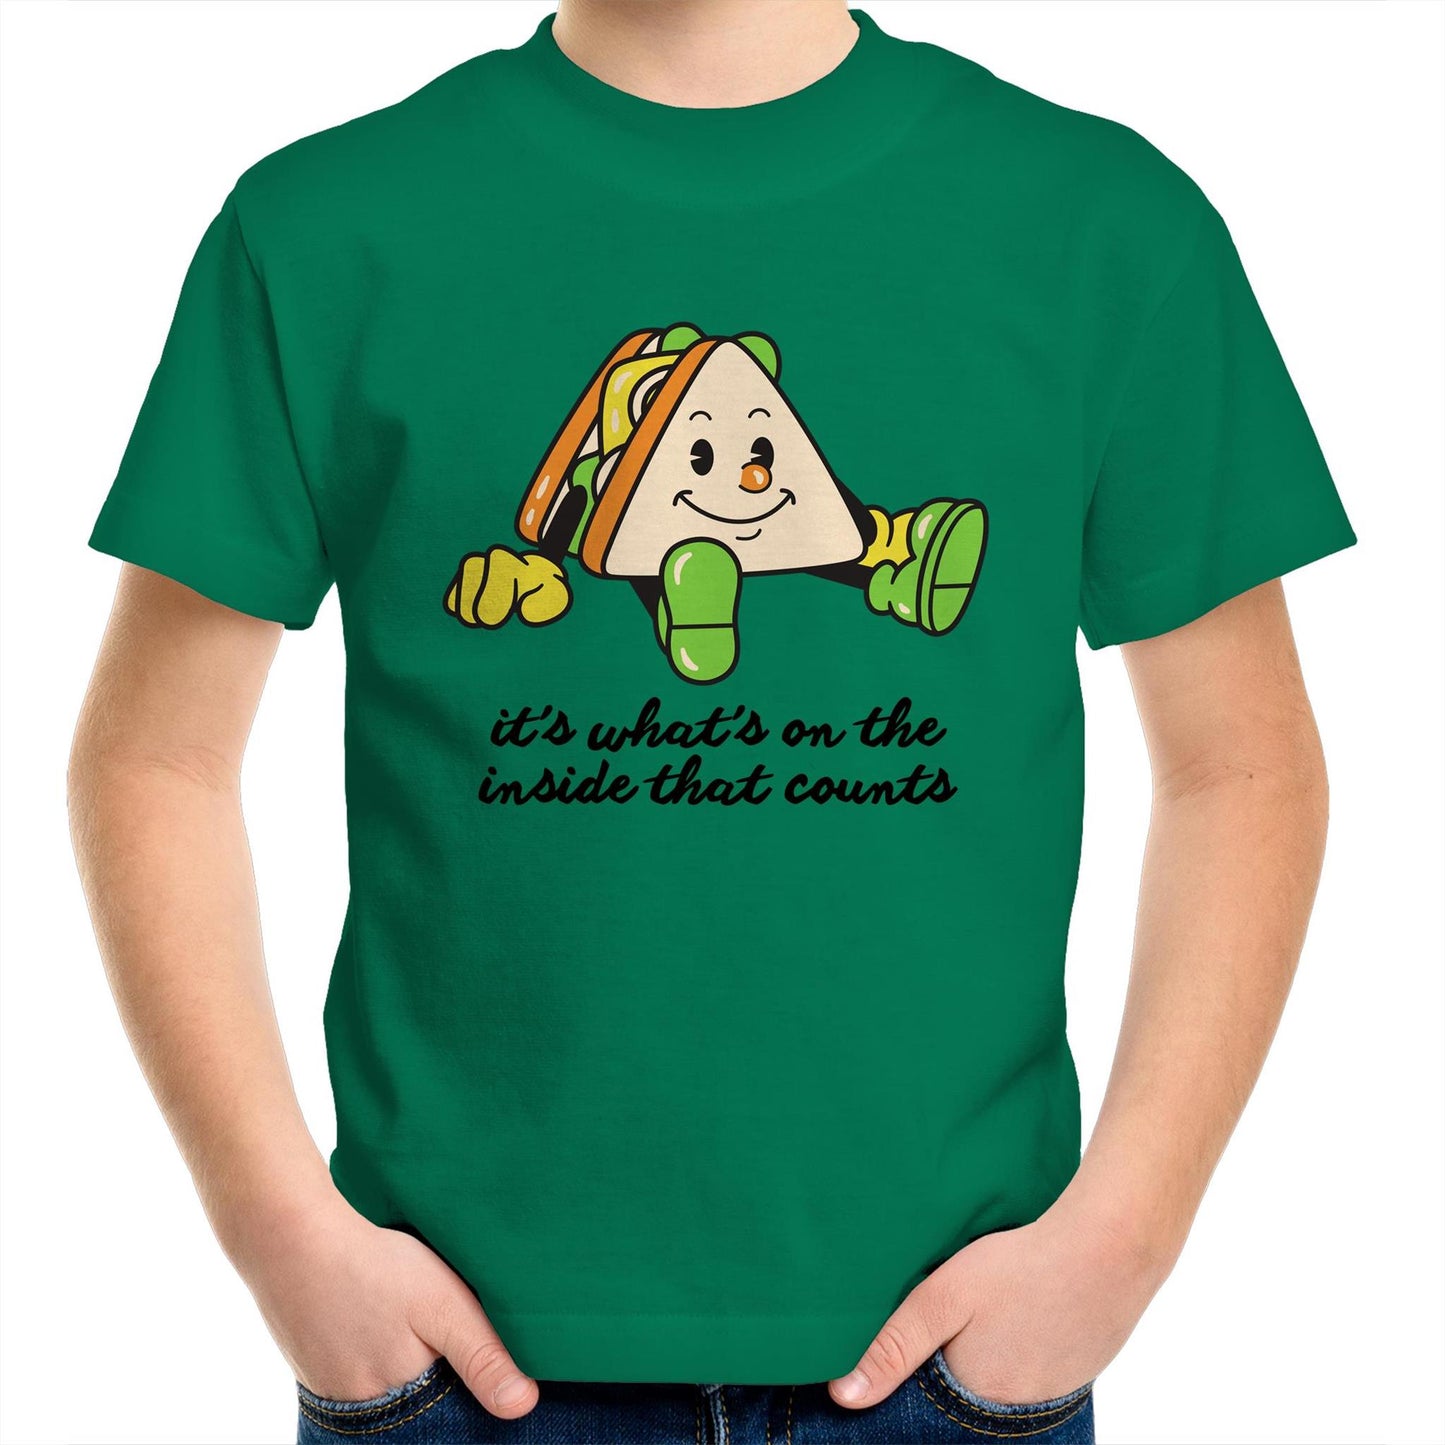 Sandwich, It's What's On The Inside That Counts - Kids Youth T-Shirt Kelly Green Kids Youth T-shirt Food Motivation